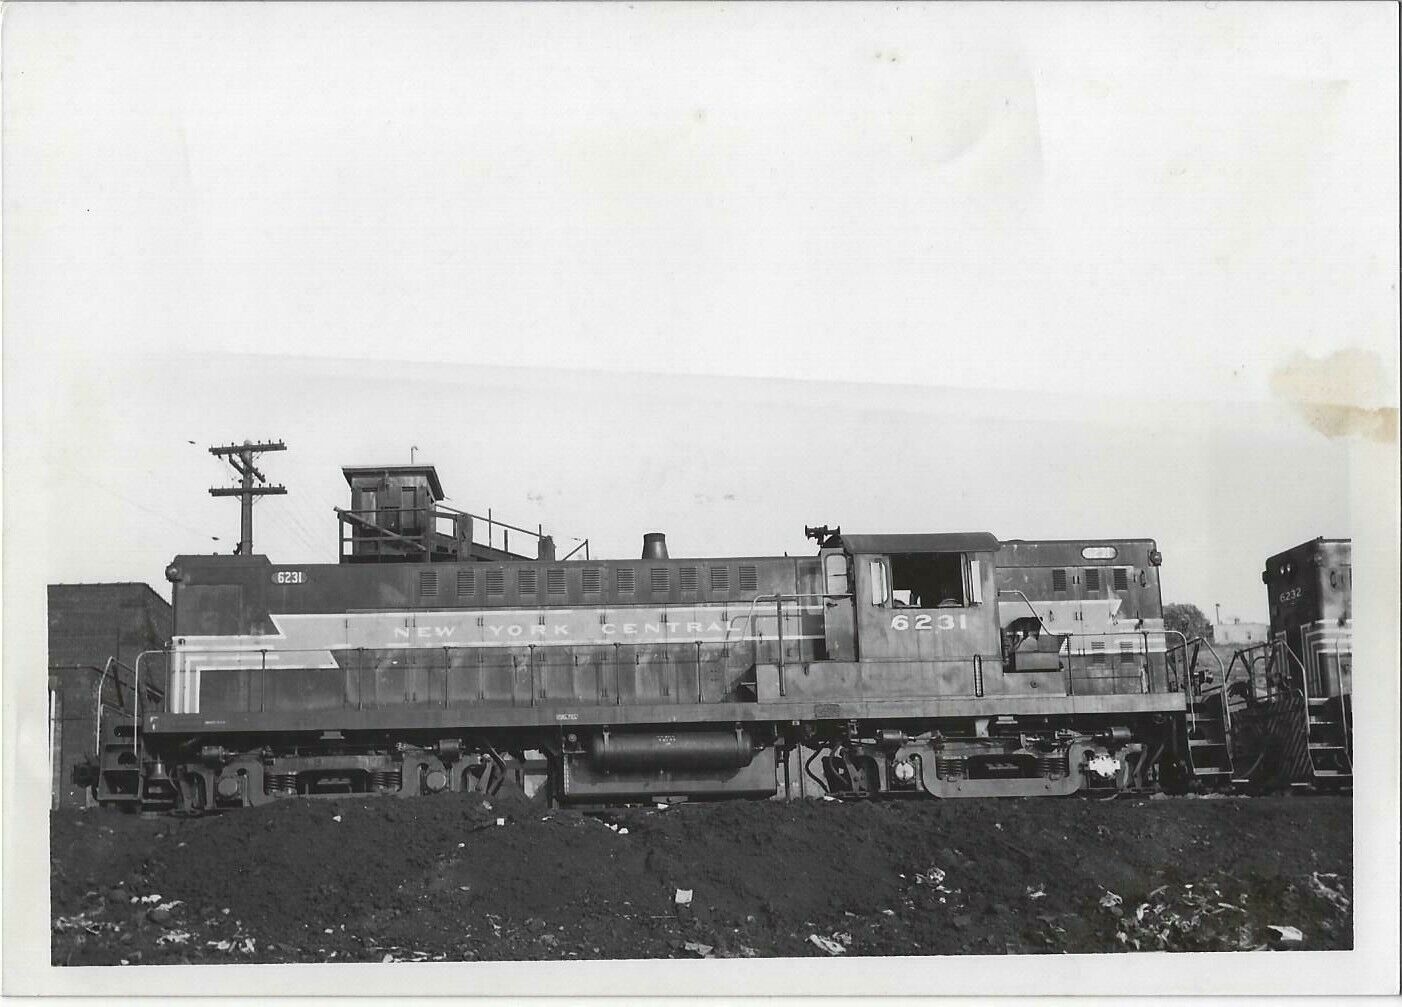 REAL PHOTO * NEW YORK CENTRAL ENGINE #6231 RS-12 